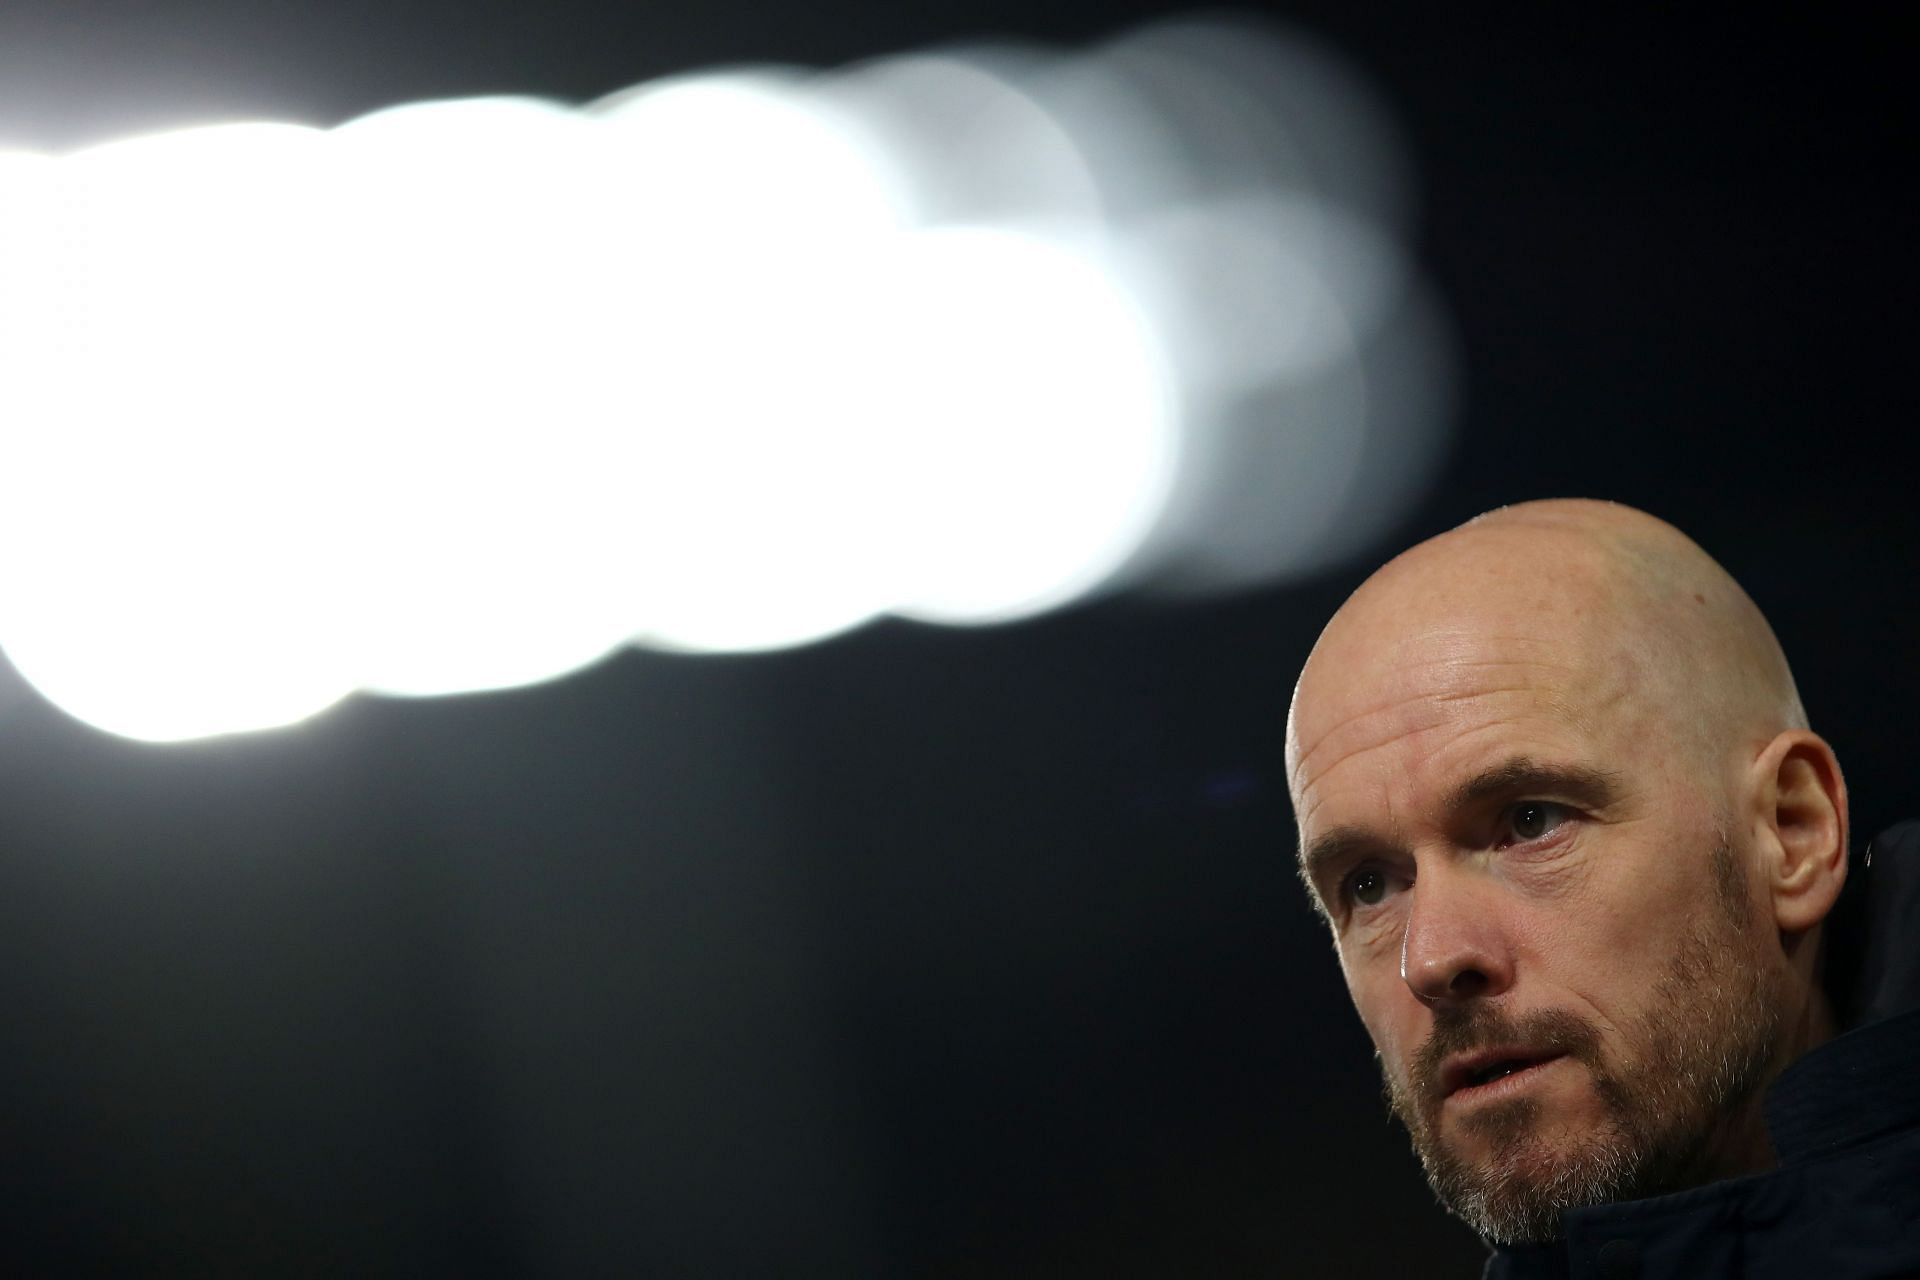 Could Ten Hag be the next Manchester United manager?